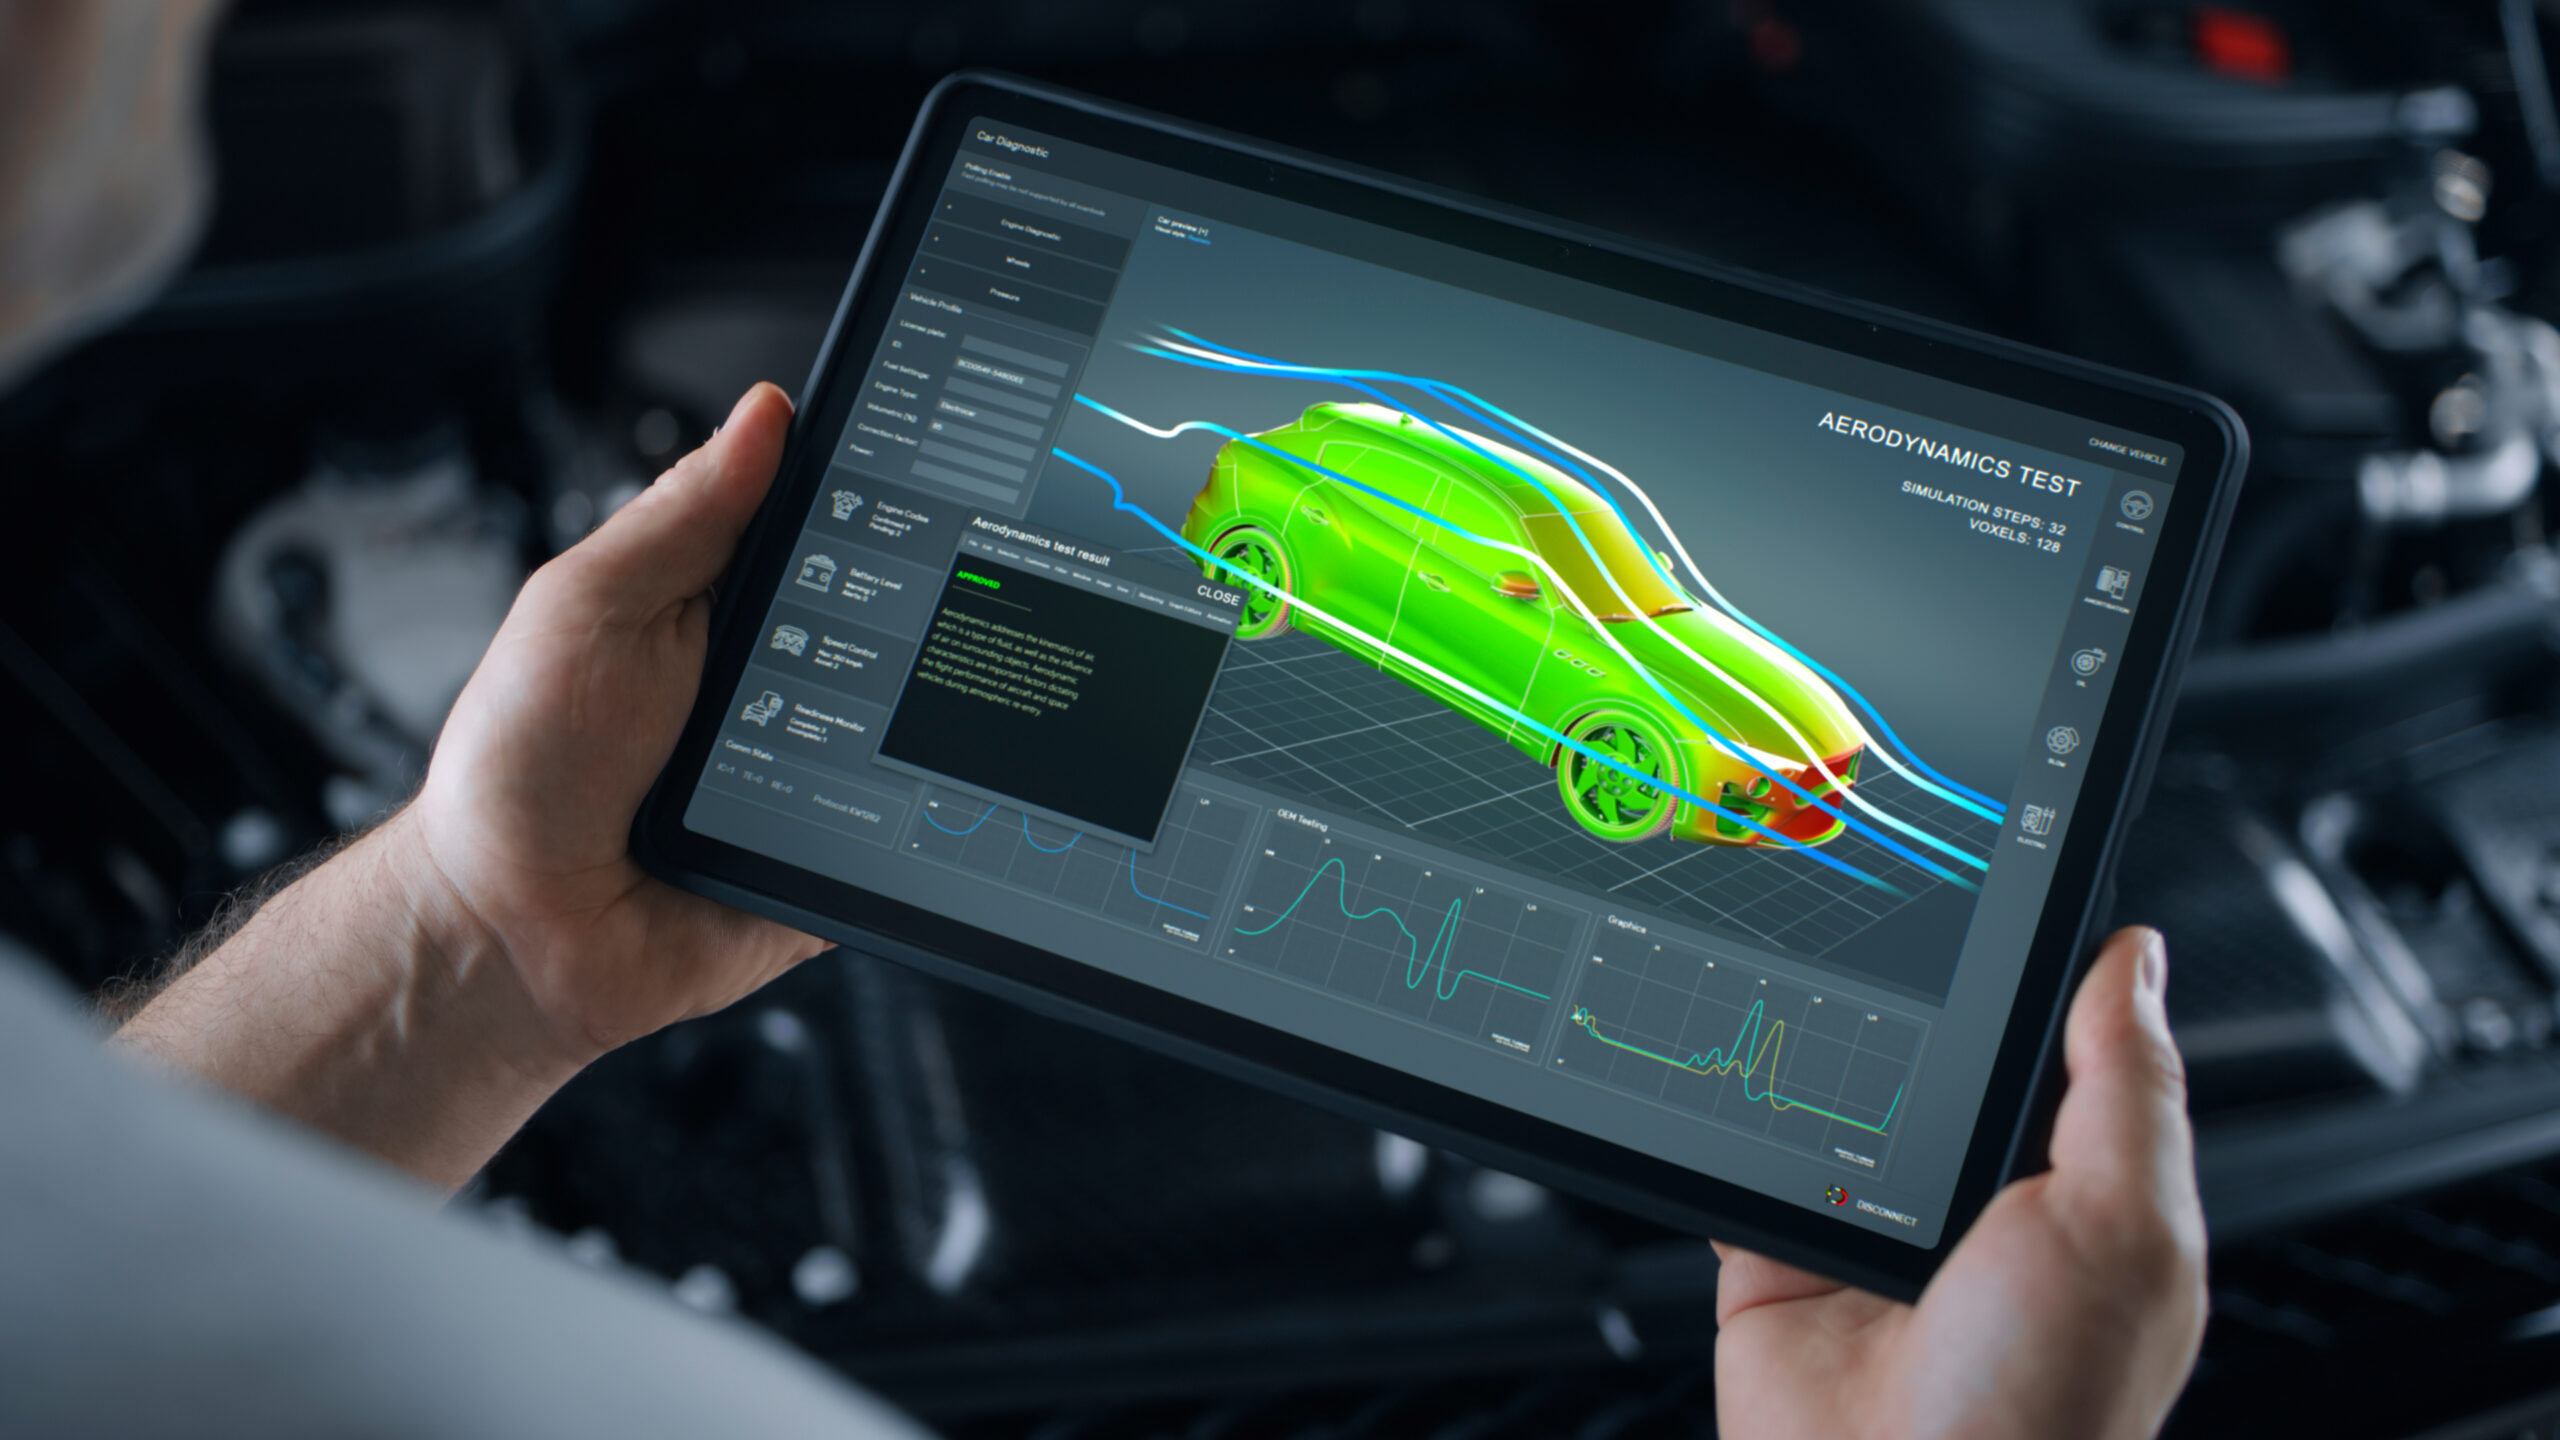 On screen tablet software for testing vehicle aerodynamics